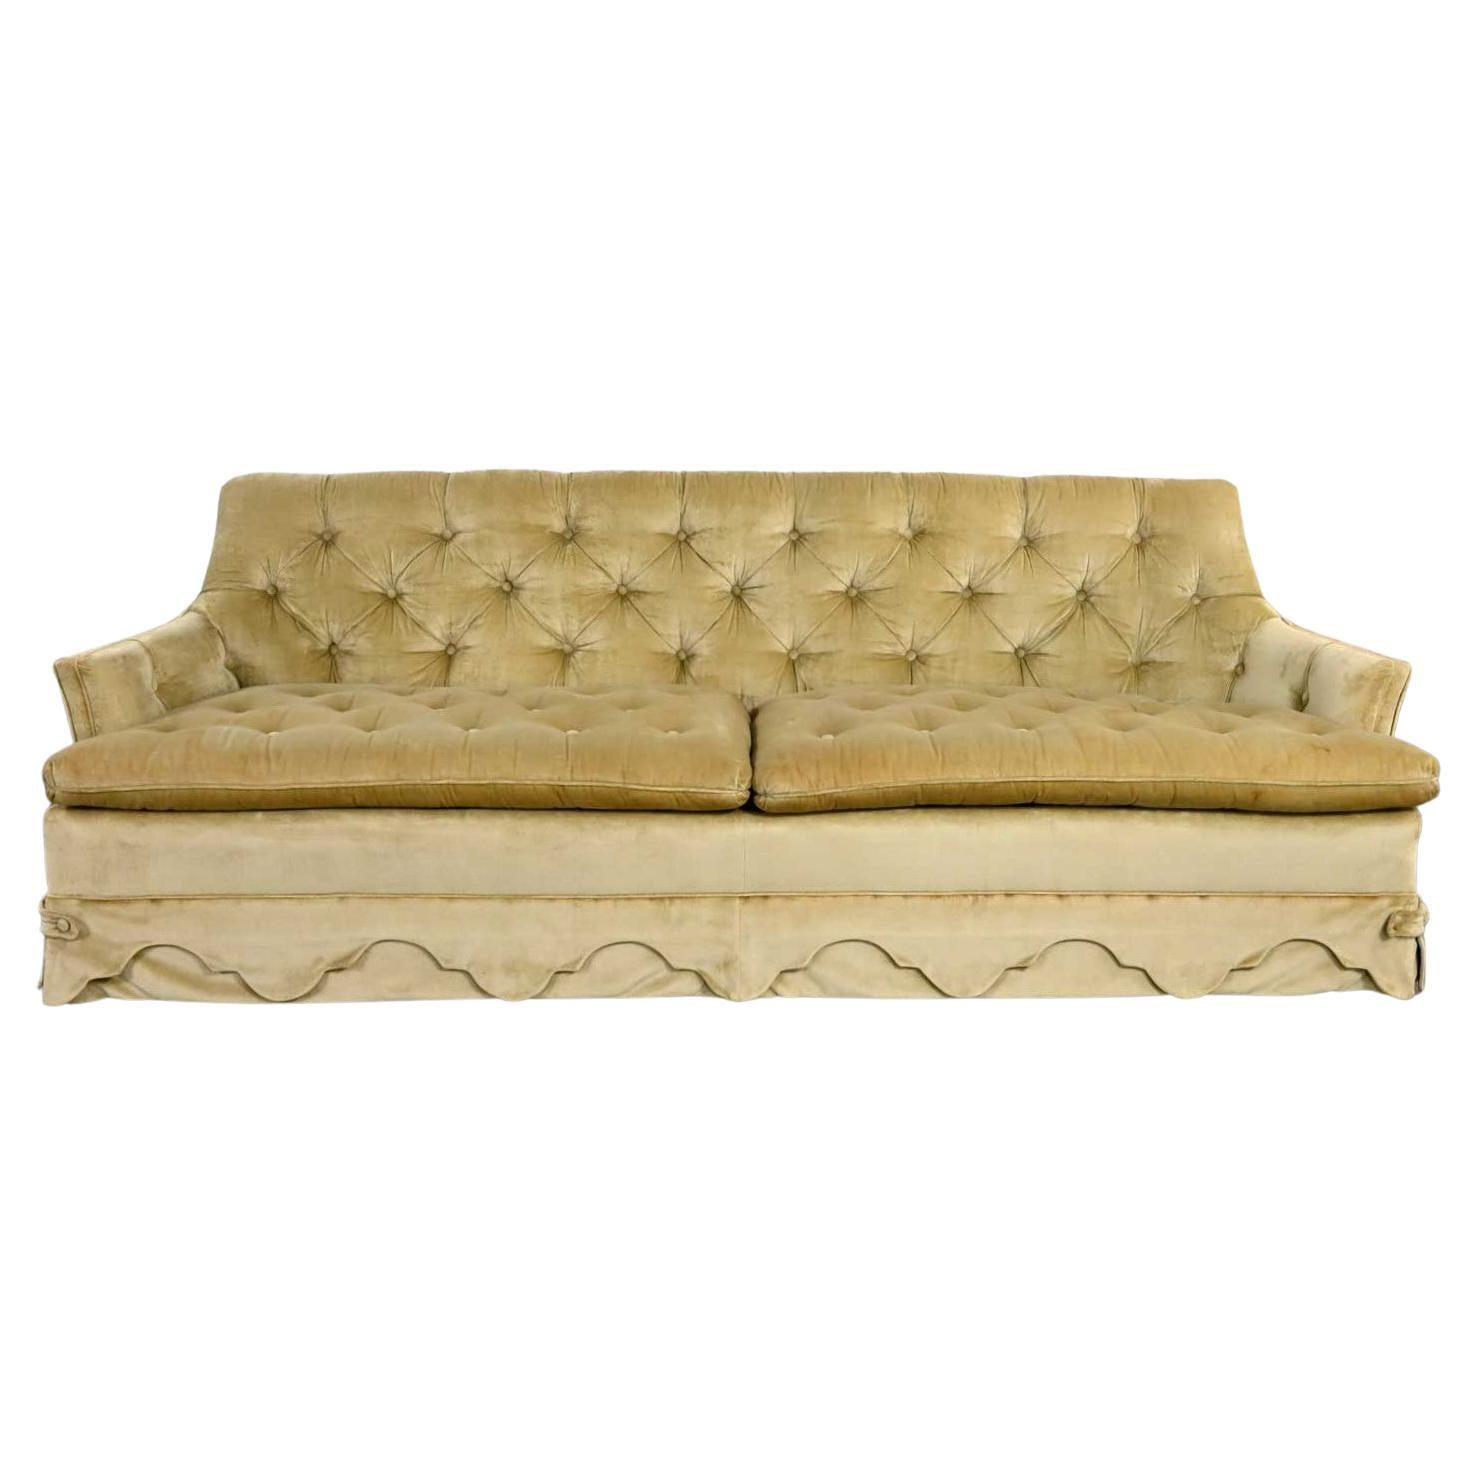 Vintage Hollywood Regency Tawny Colored Button Tufted Velvet Sofa by Heritage